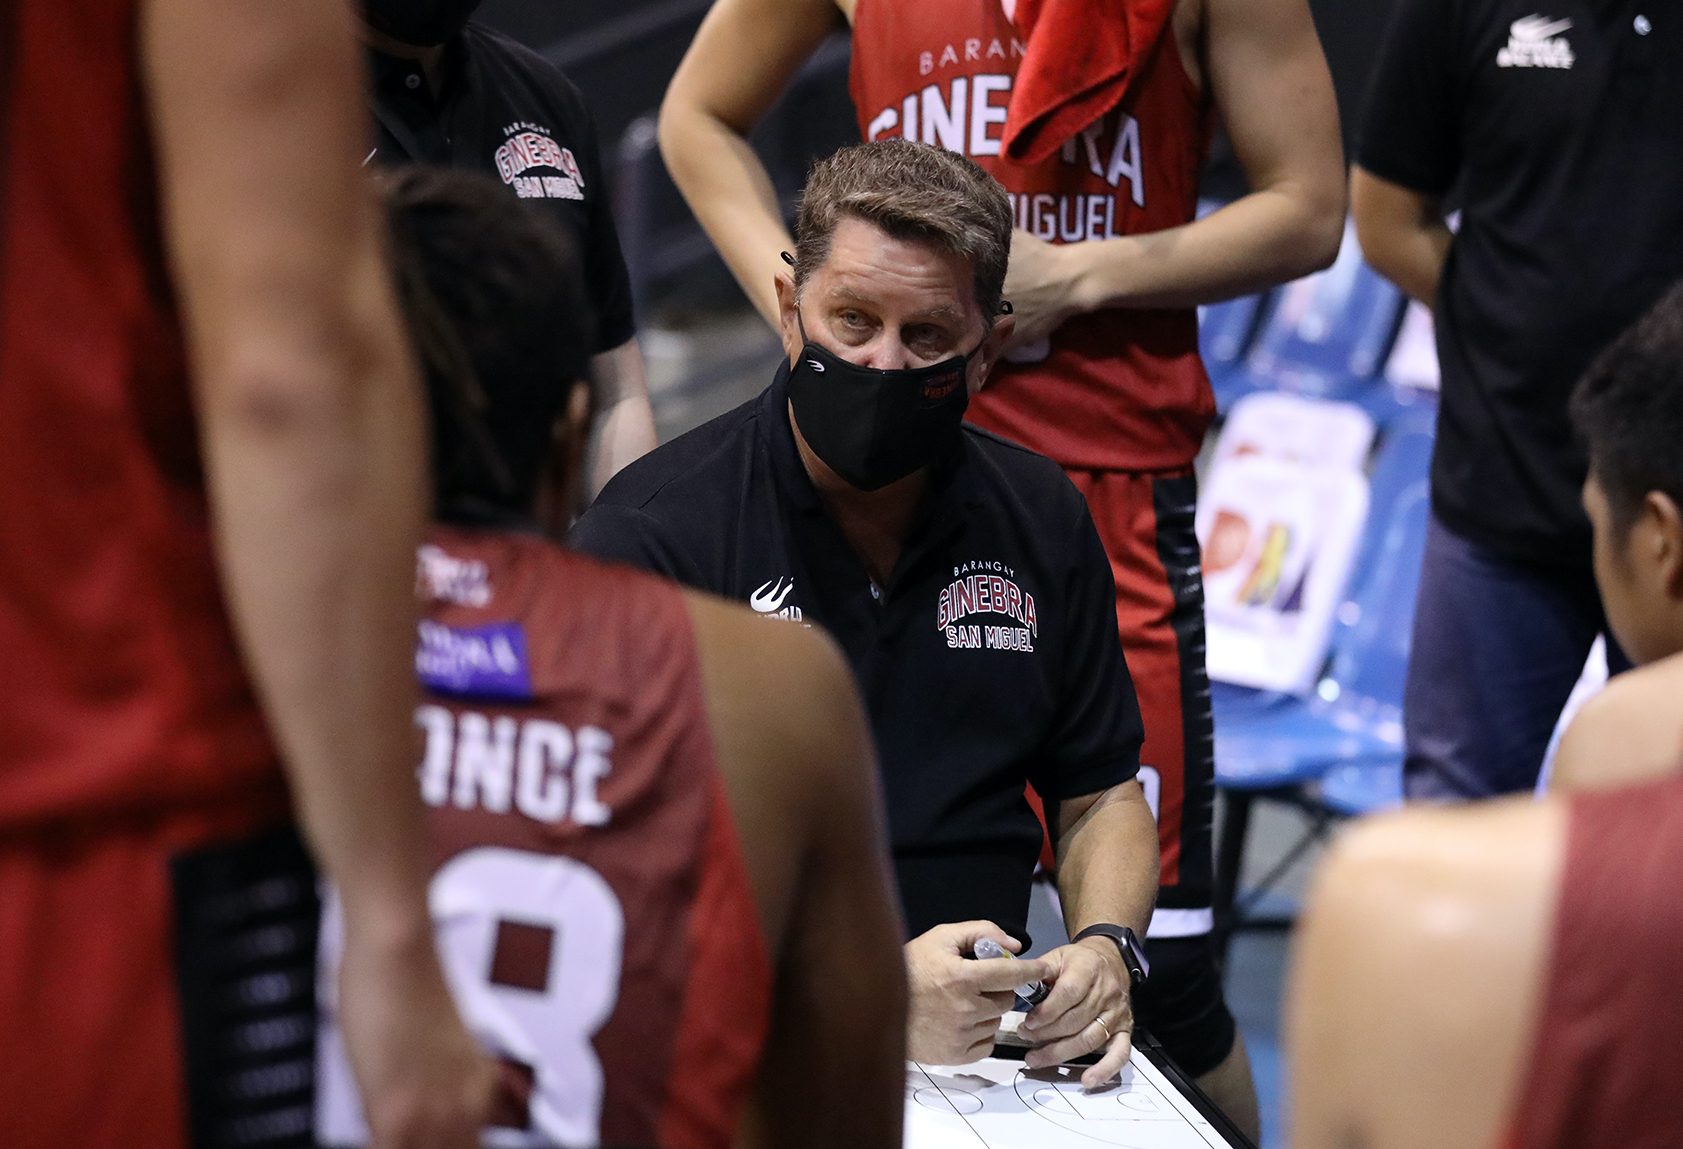 Cone says sorry for Ginebra loss to sister team San Miguel